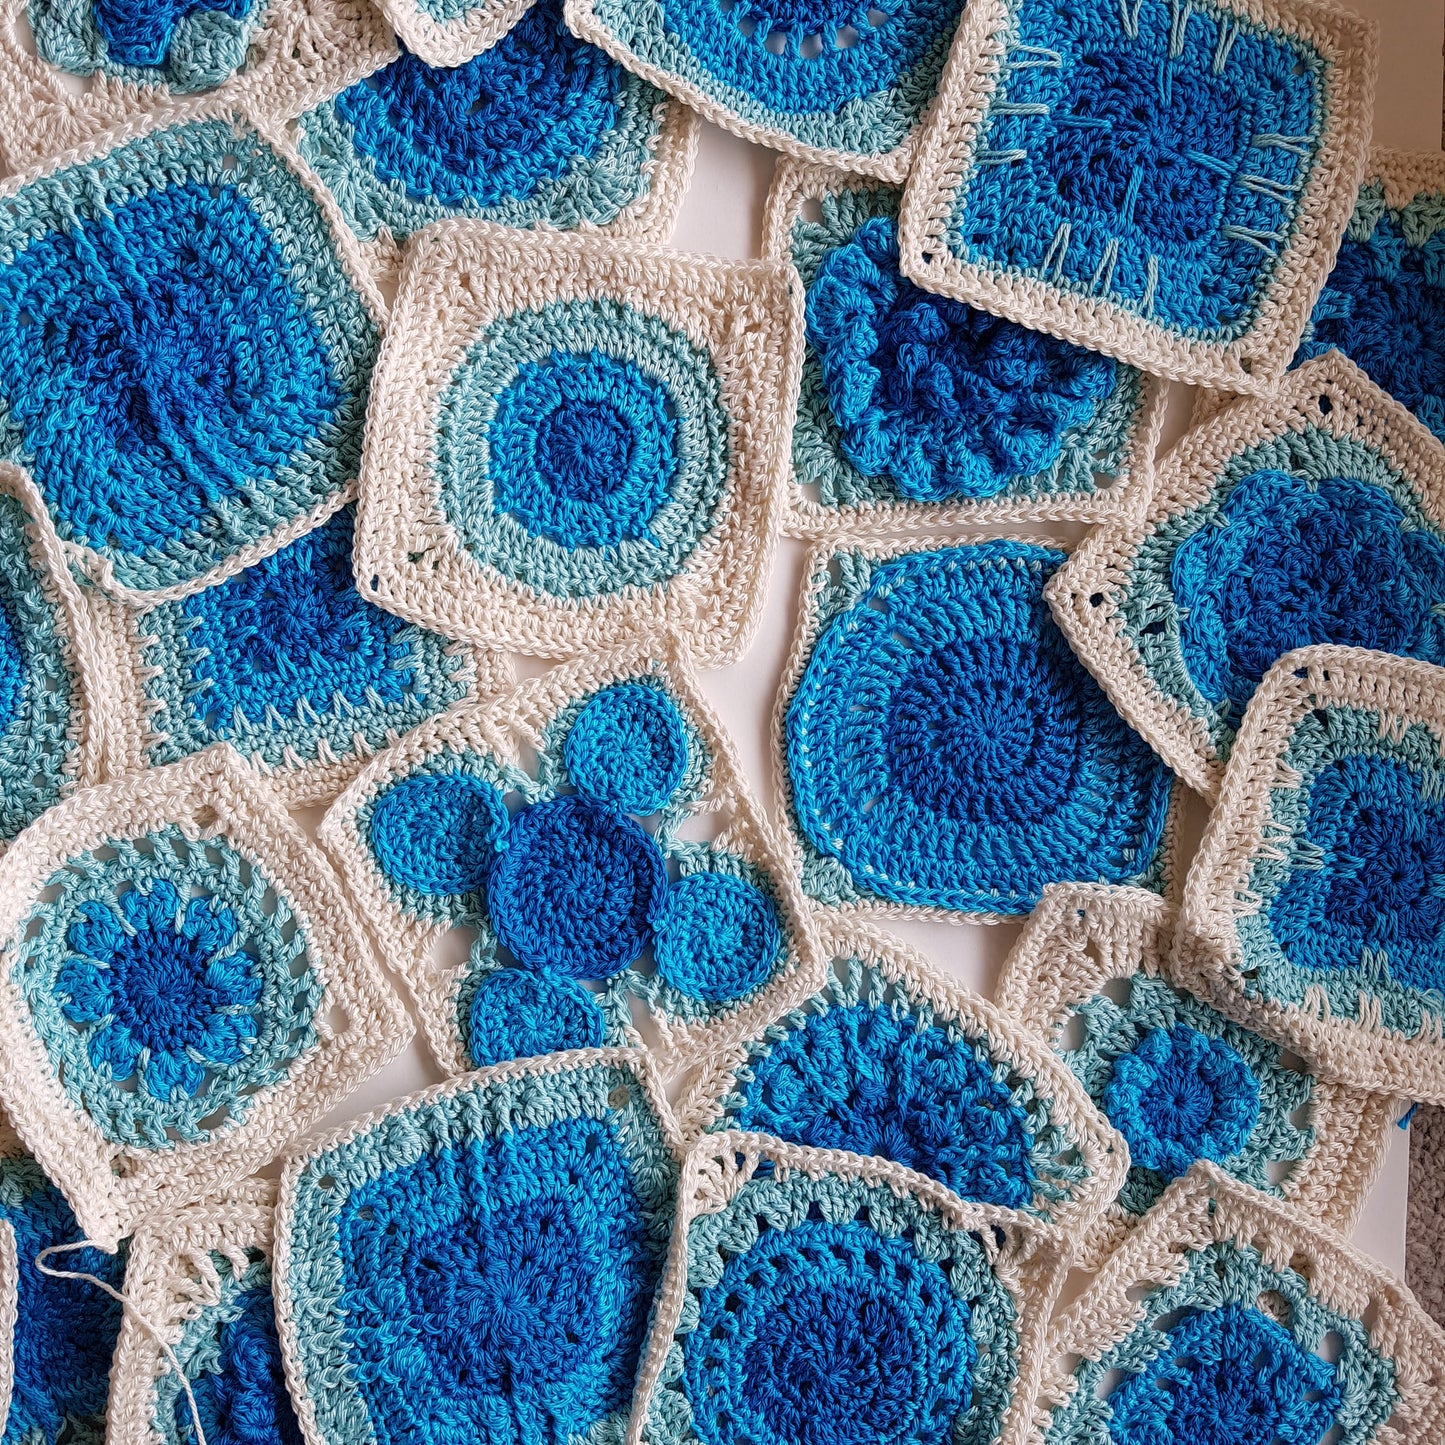 Granny squares in blues and cream from Granny Square Flair by Shelley Husband